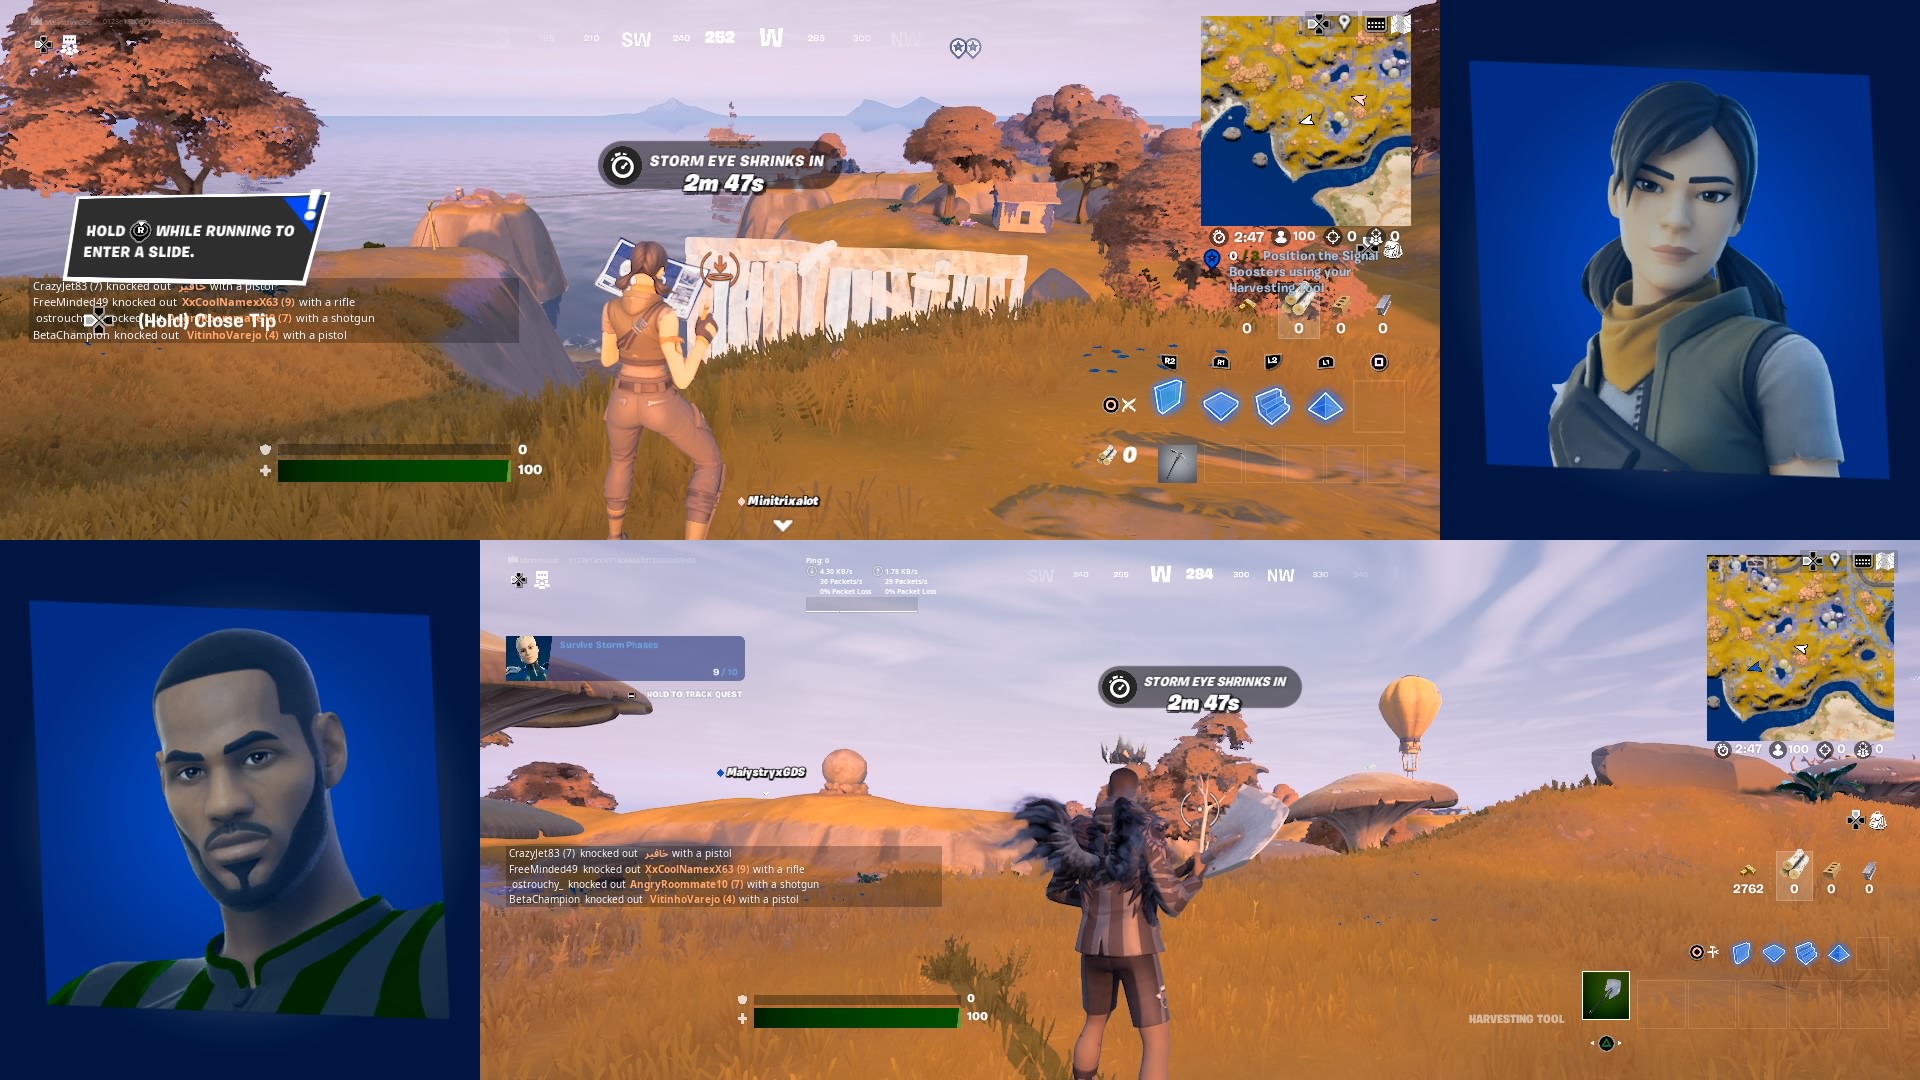 How to play split screen on fortnite xbox 2023?